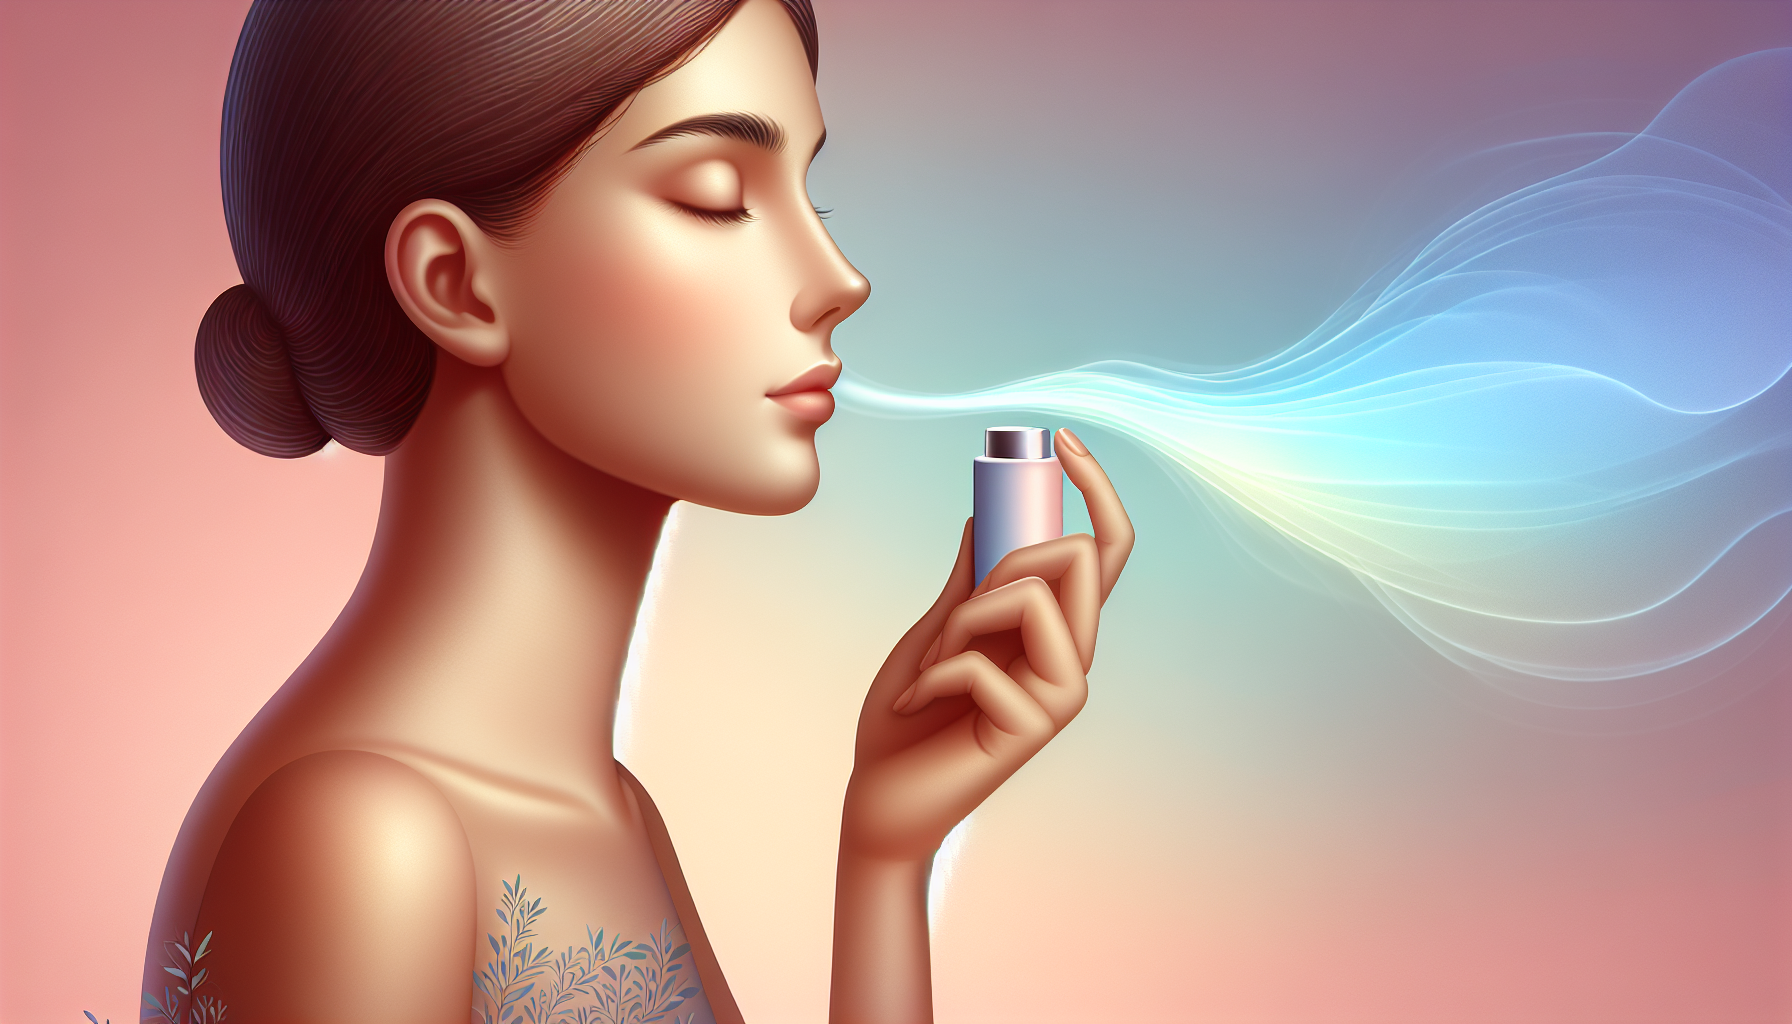 Discover Calm: The Top Aromatherapy Inhaler for Anxiety Relief